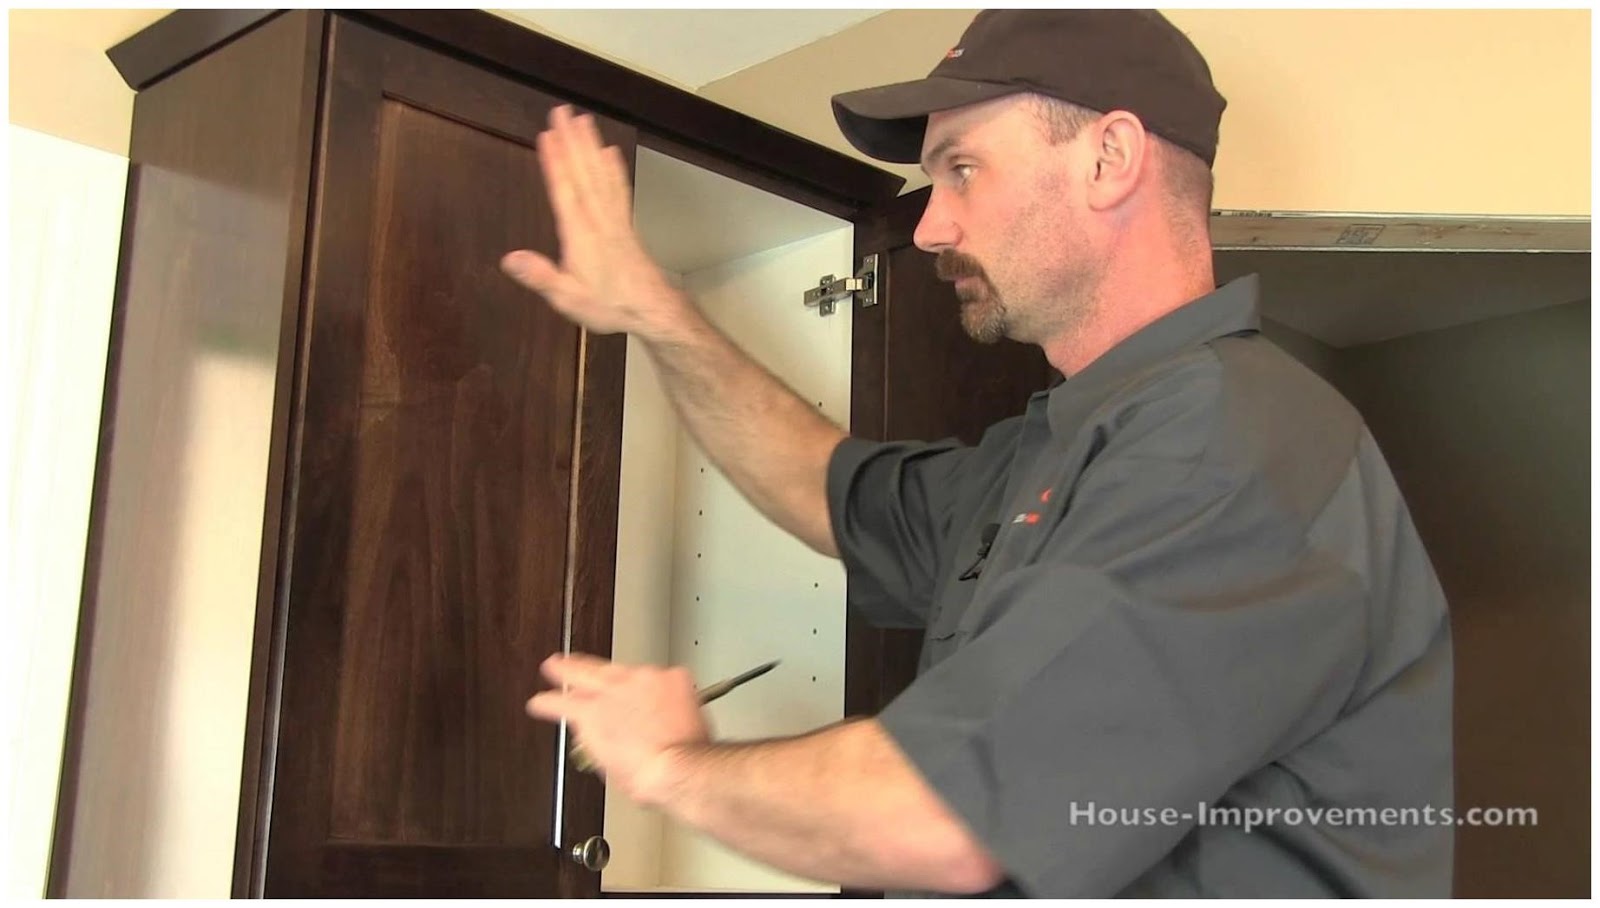 20 Can I Just Replace Kitchen Cabinet Doors How To Install Cabinet Doors Drawer Fronts Can,I,Just,Replace,Kitchen,Cabinet,Doors